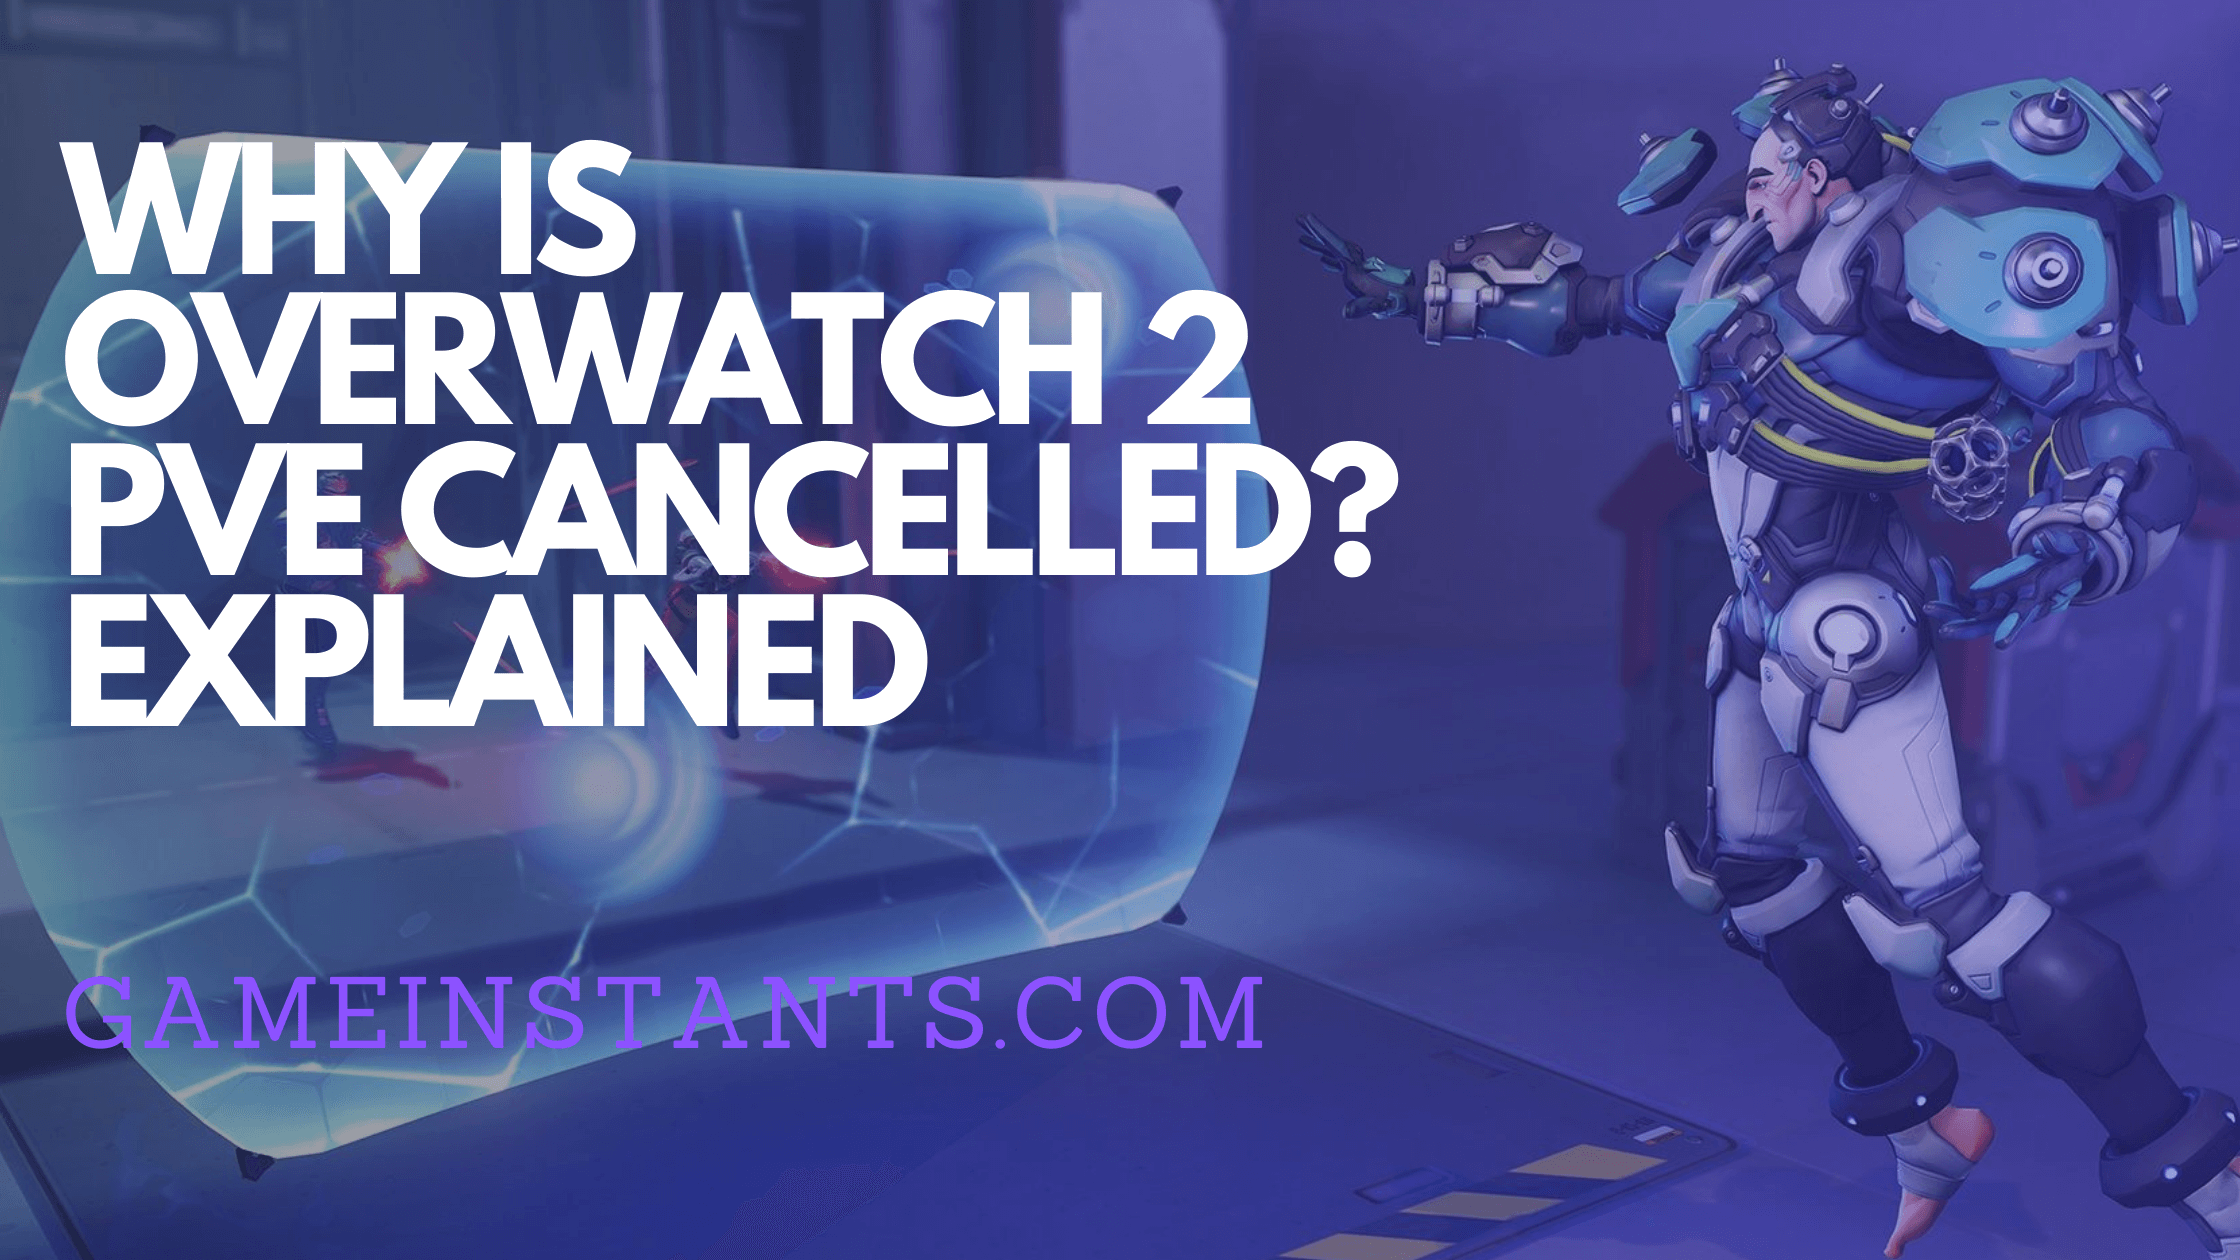 Overwatch 2 PVE Cancelled